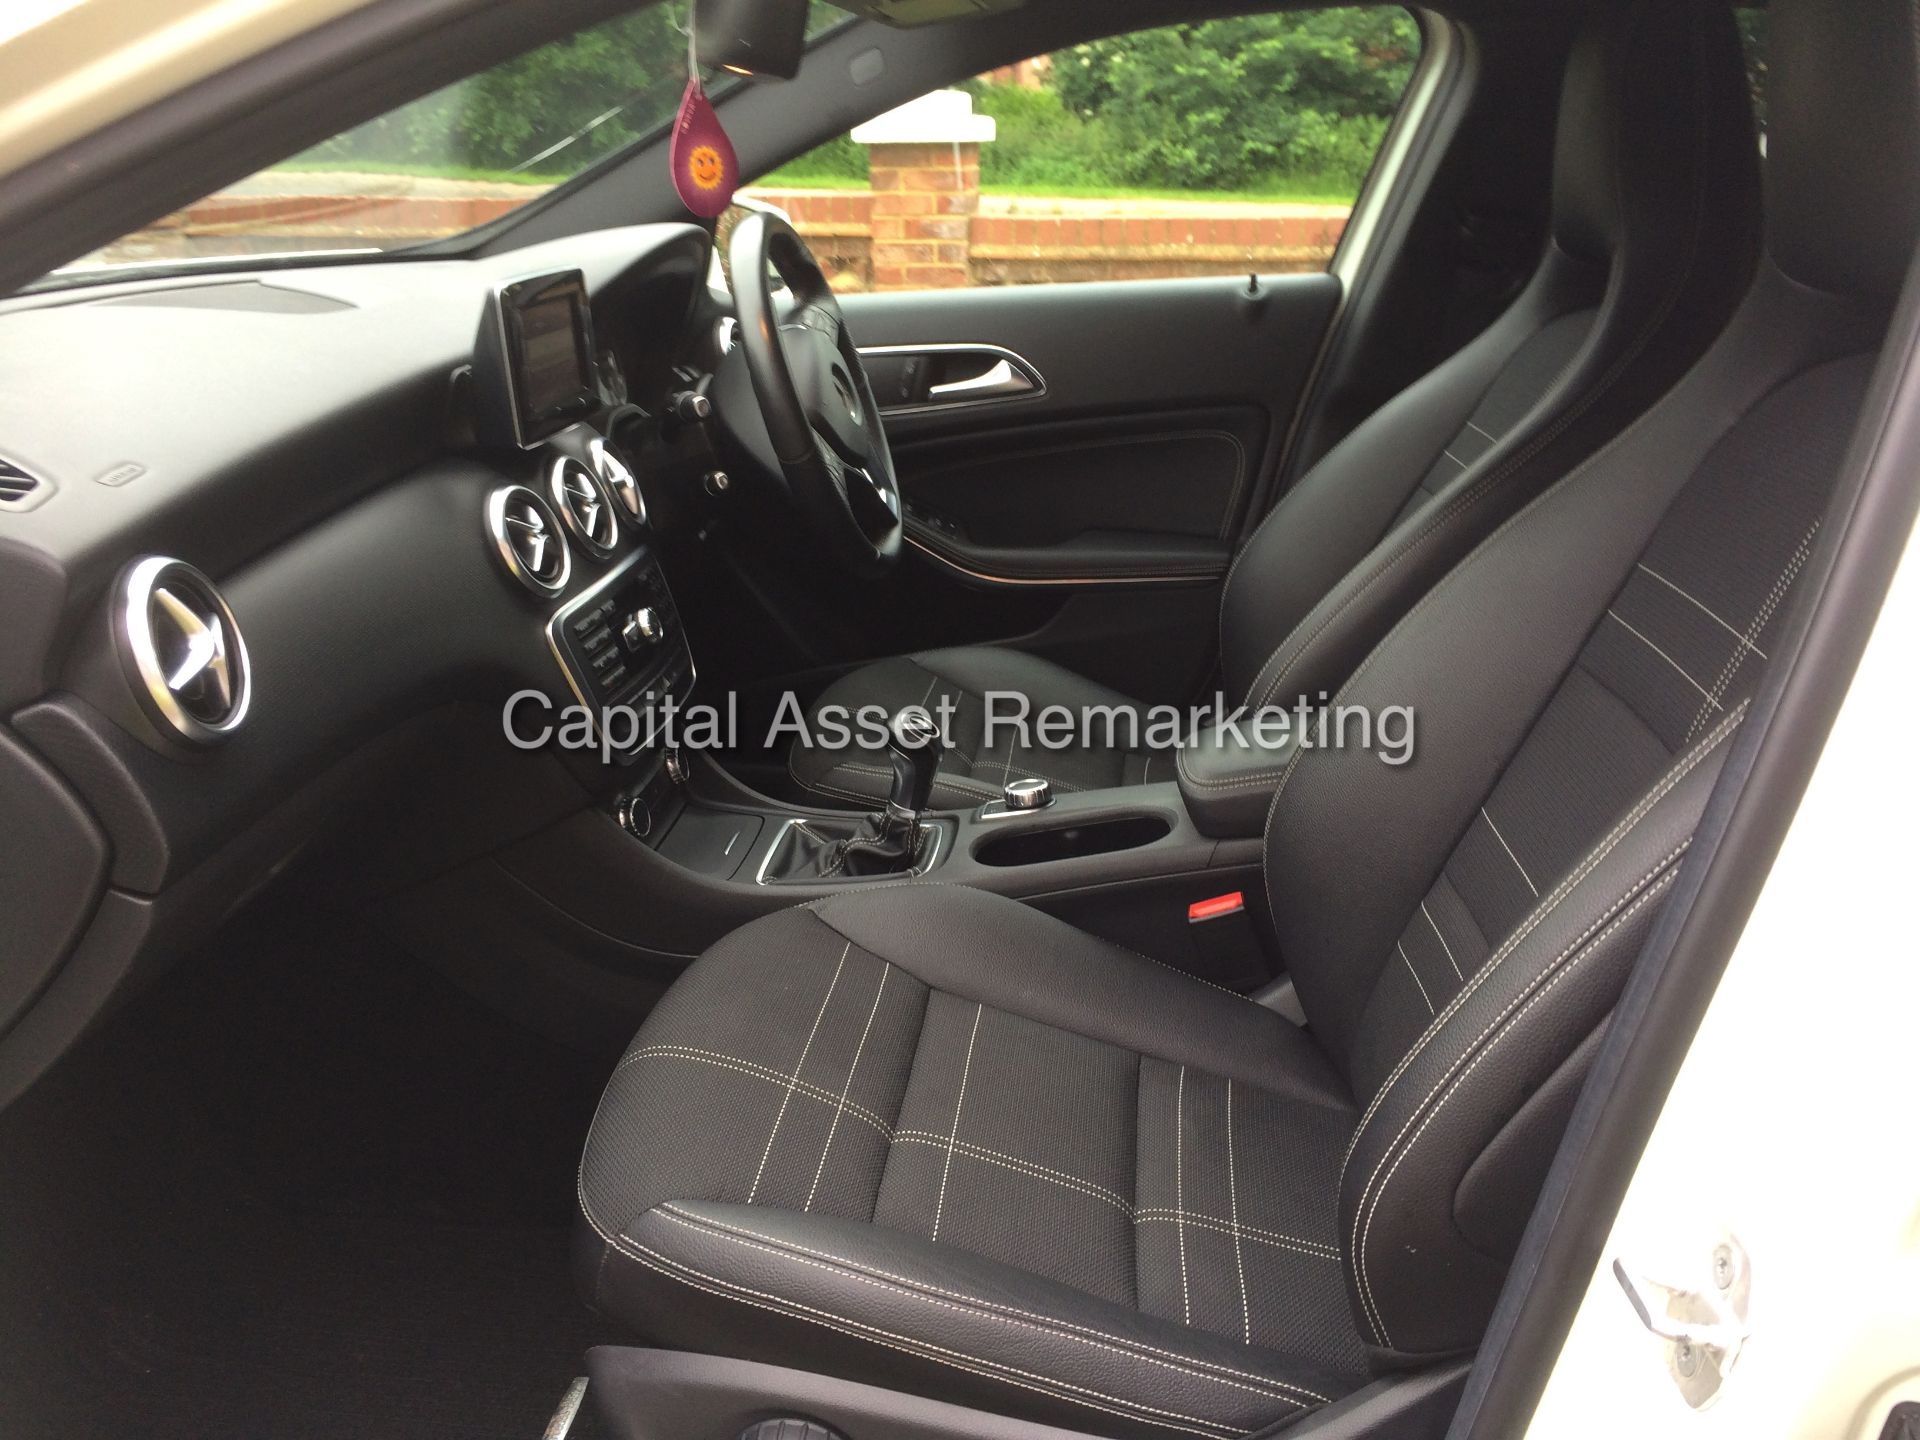 (On Sale) MERCEDES A180cdi "SPORT EDITION" (2015 MODEL) ONLY 25,000 MILES - SAT NAV -PARTIAL LEATHER - Image 10 of 18